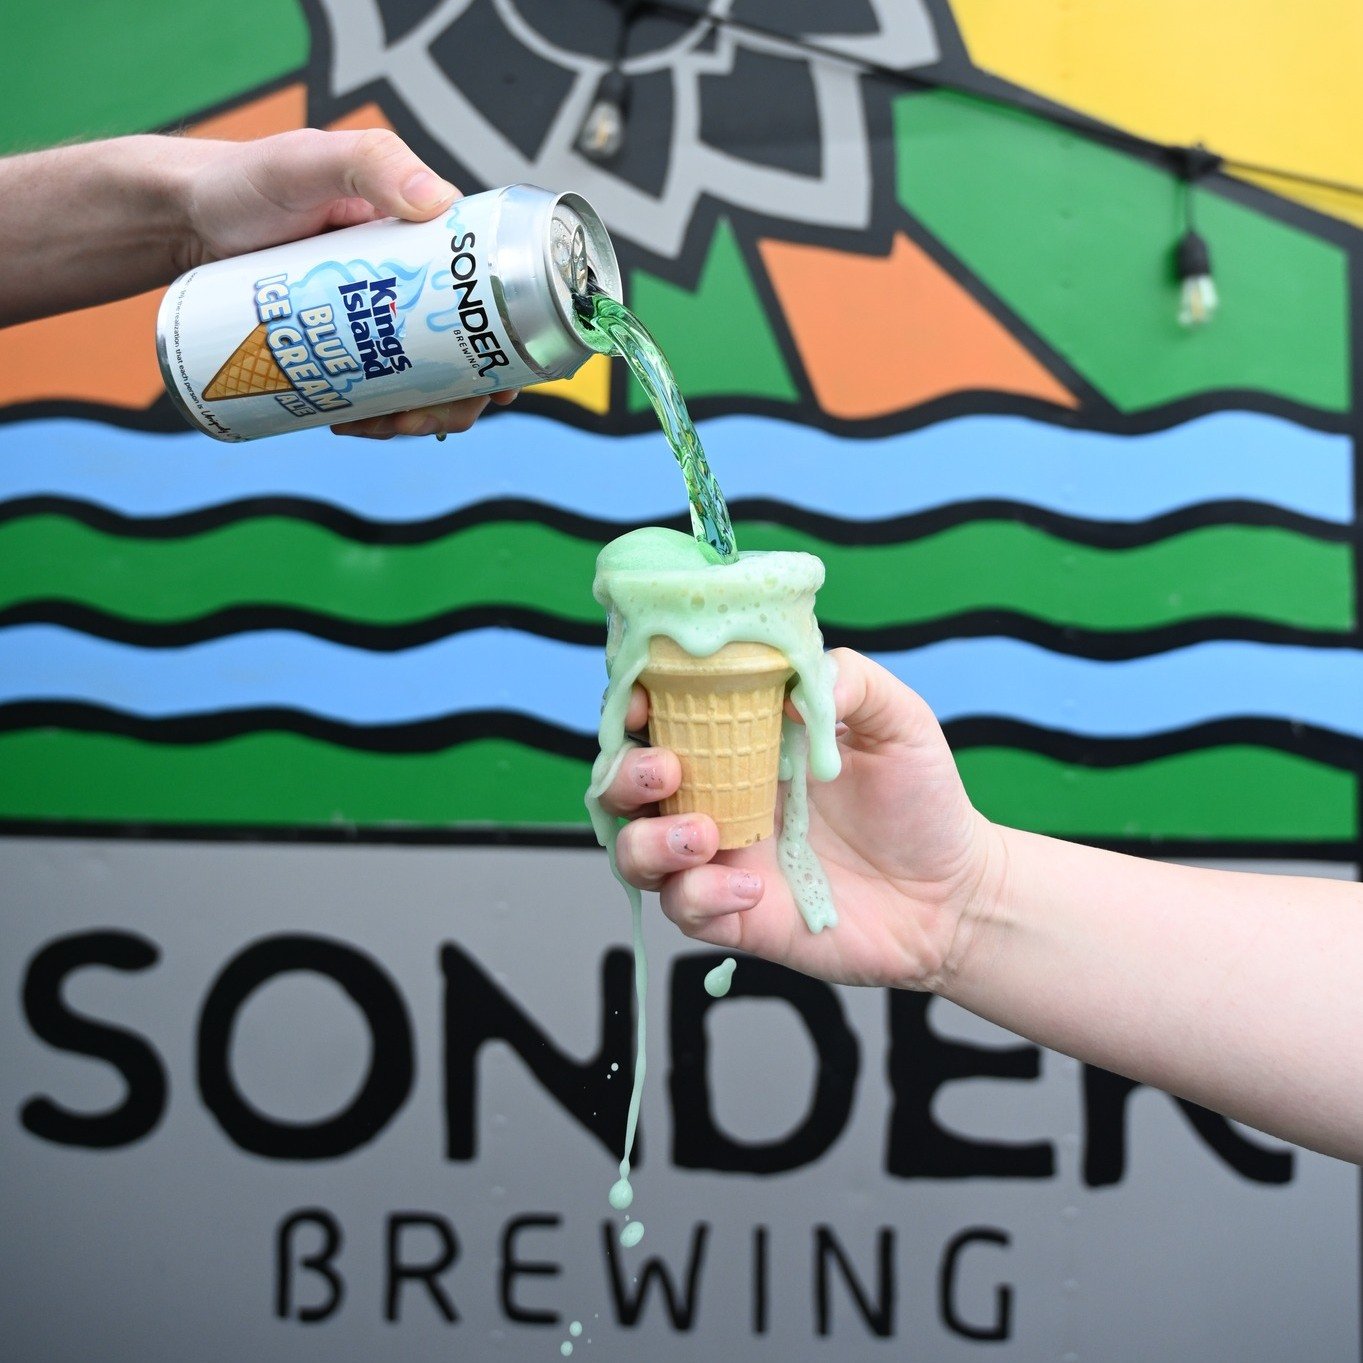 Kings Island Blue Ice Cream is available in 4-packs* and on draft at our Mason Taproom &amp; Beer Garden while supplies last! We promise to serve drafts in a glass, not a cone 💙🍻

*Limit two 4-packs per person

#SonderBrewing #UniquelyCrafted #King